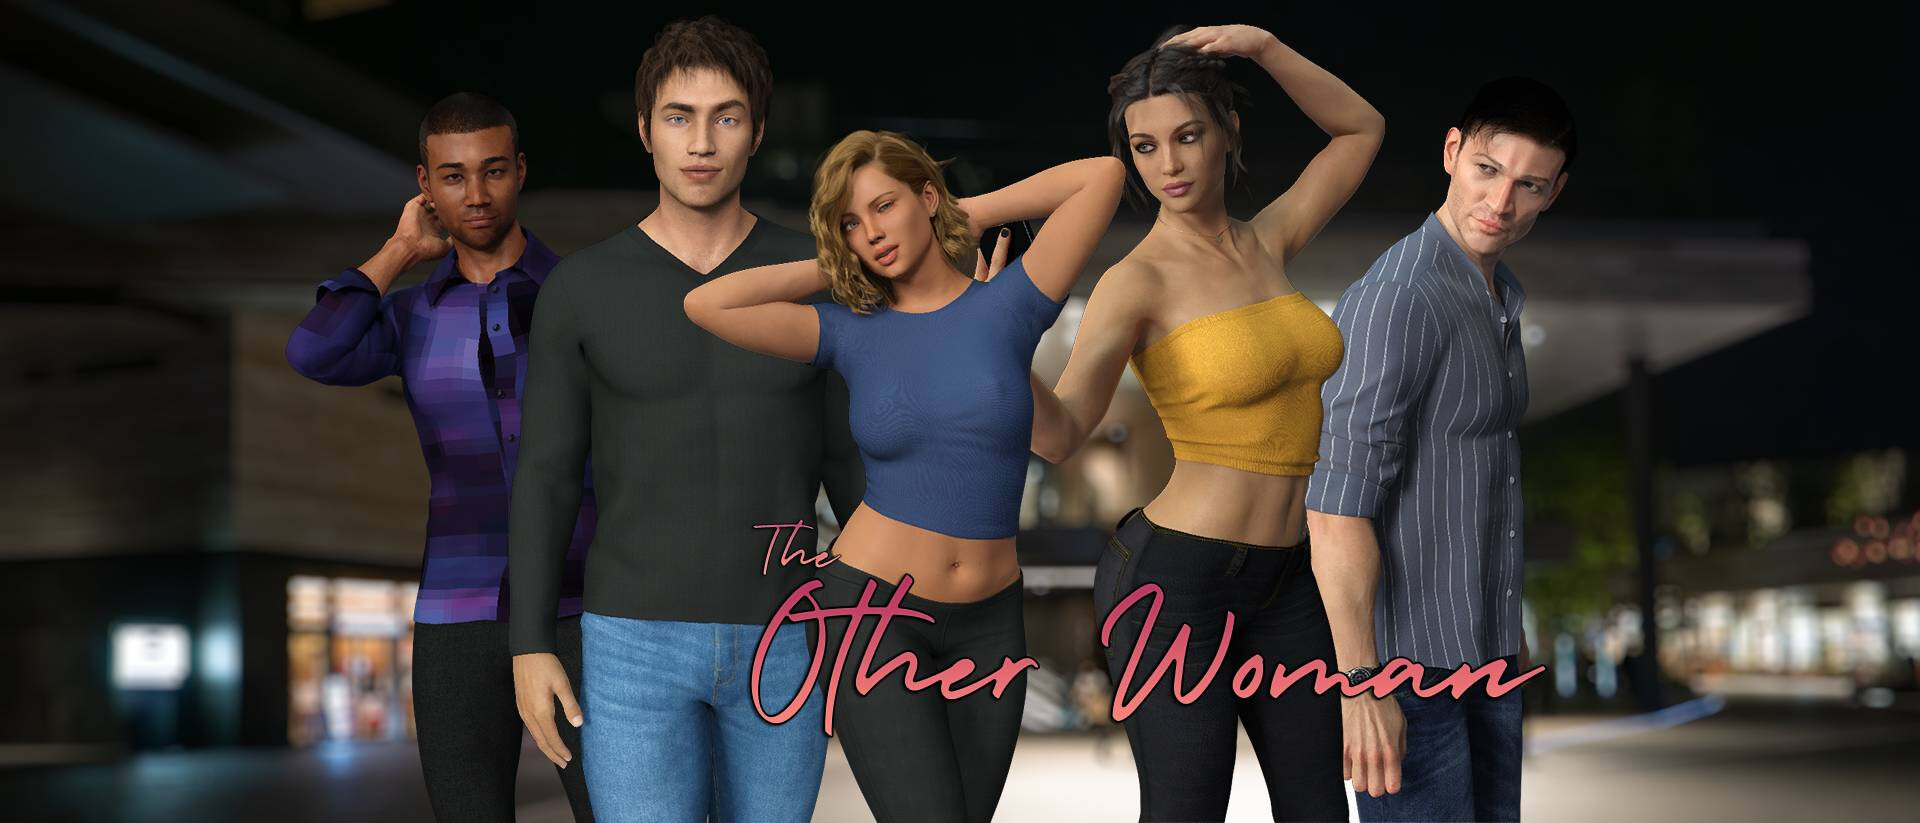 The Other Woman Main Image